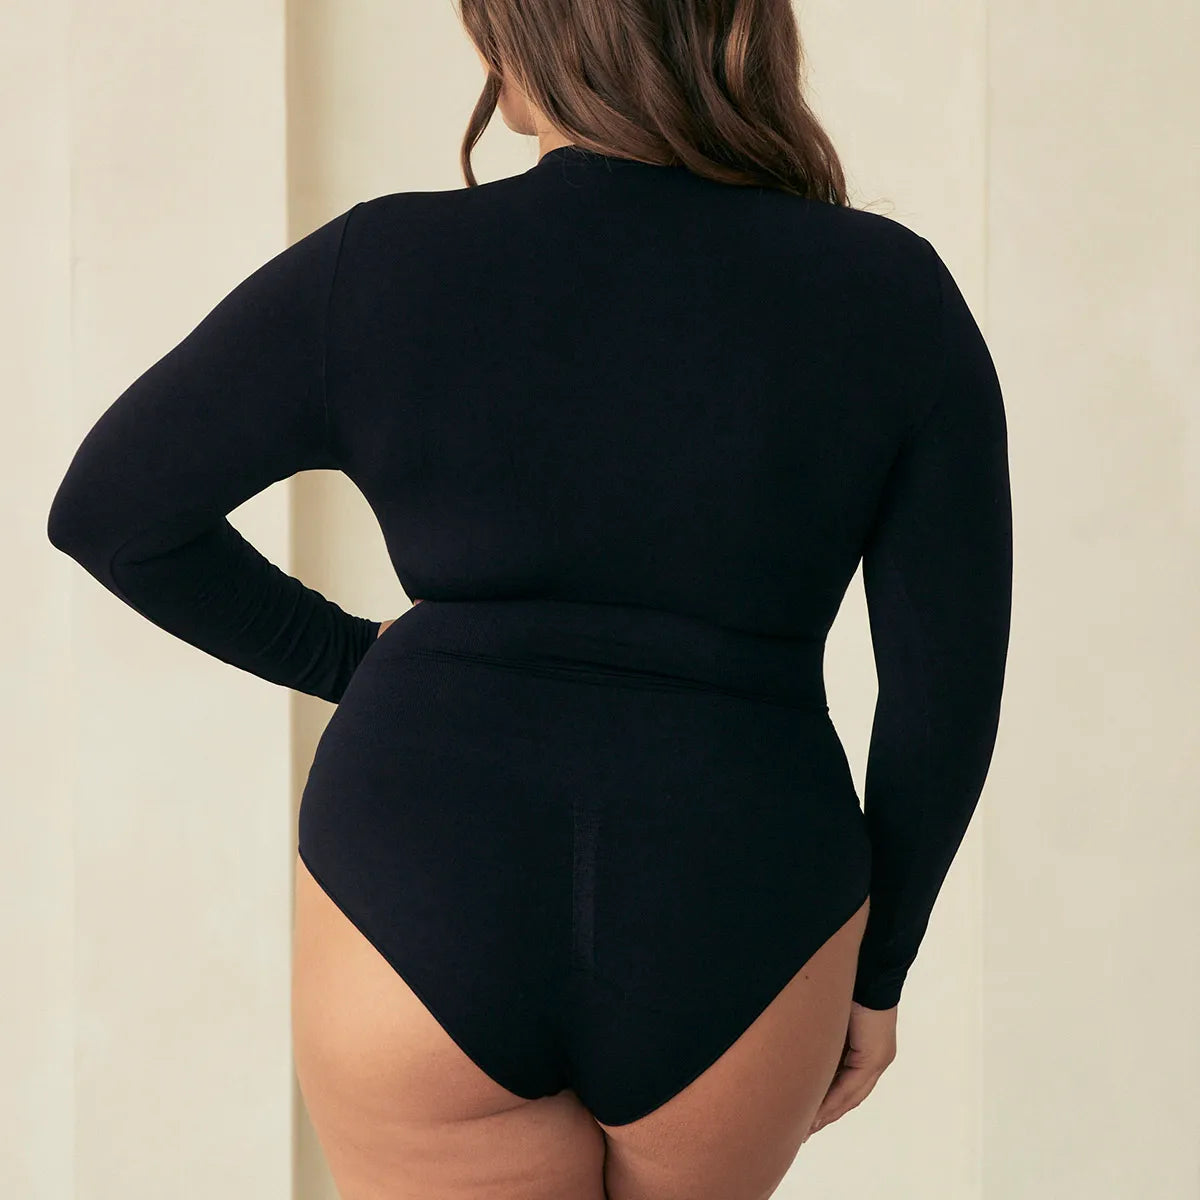 Seamless Wear your own Bra Bodysuit shaper with extra long